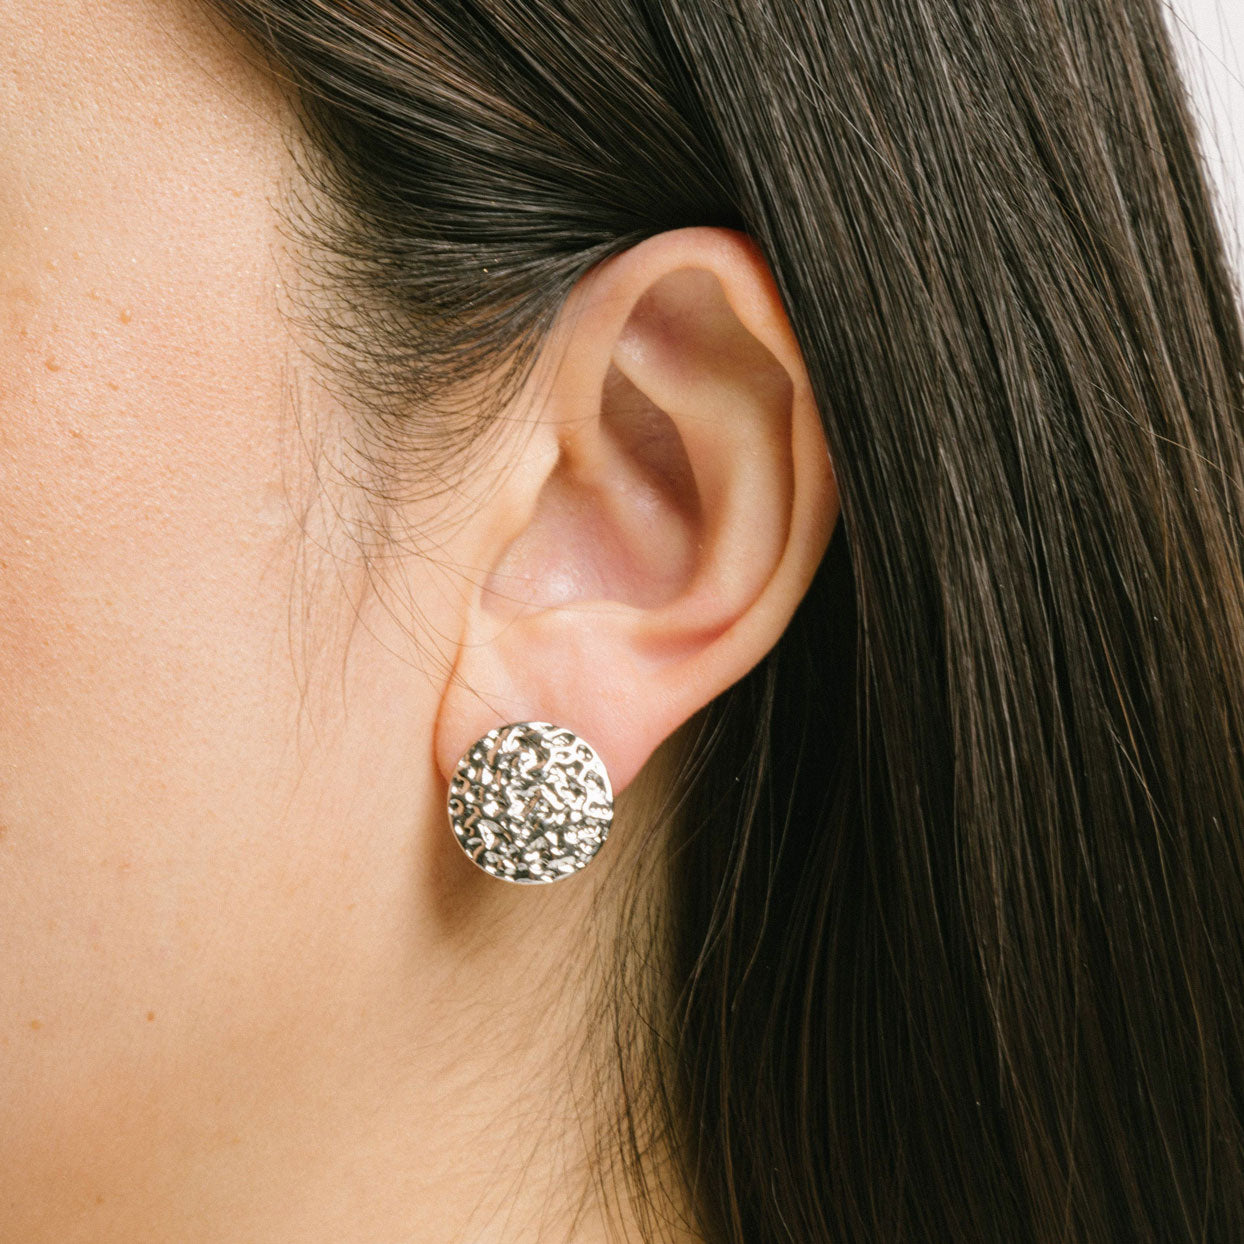 A model wearing the Paloma Clip-On Earrings in Silver provide a secure fit that is perfect for all ear types, including thick/large ears, sensitive ears, small/ thin ears, and stretched/healing ears. These earrings are crafted with a copper alloy and are free of lead and nickel. Their removable rubber padding ensures comfortable wear for up to 12 hours. This package contains one pair of earrings.